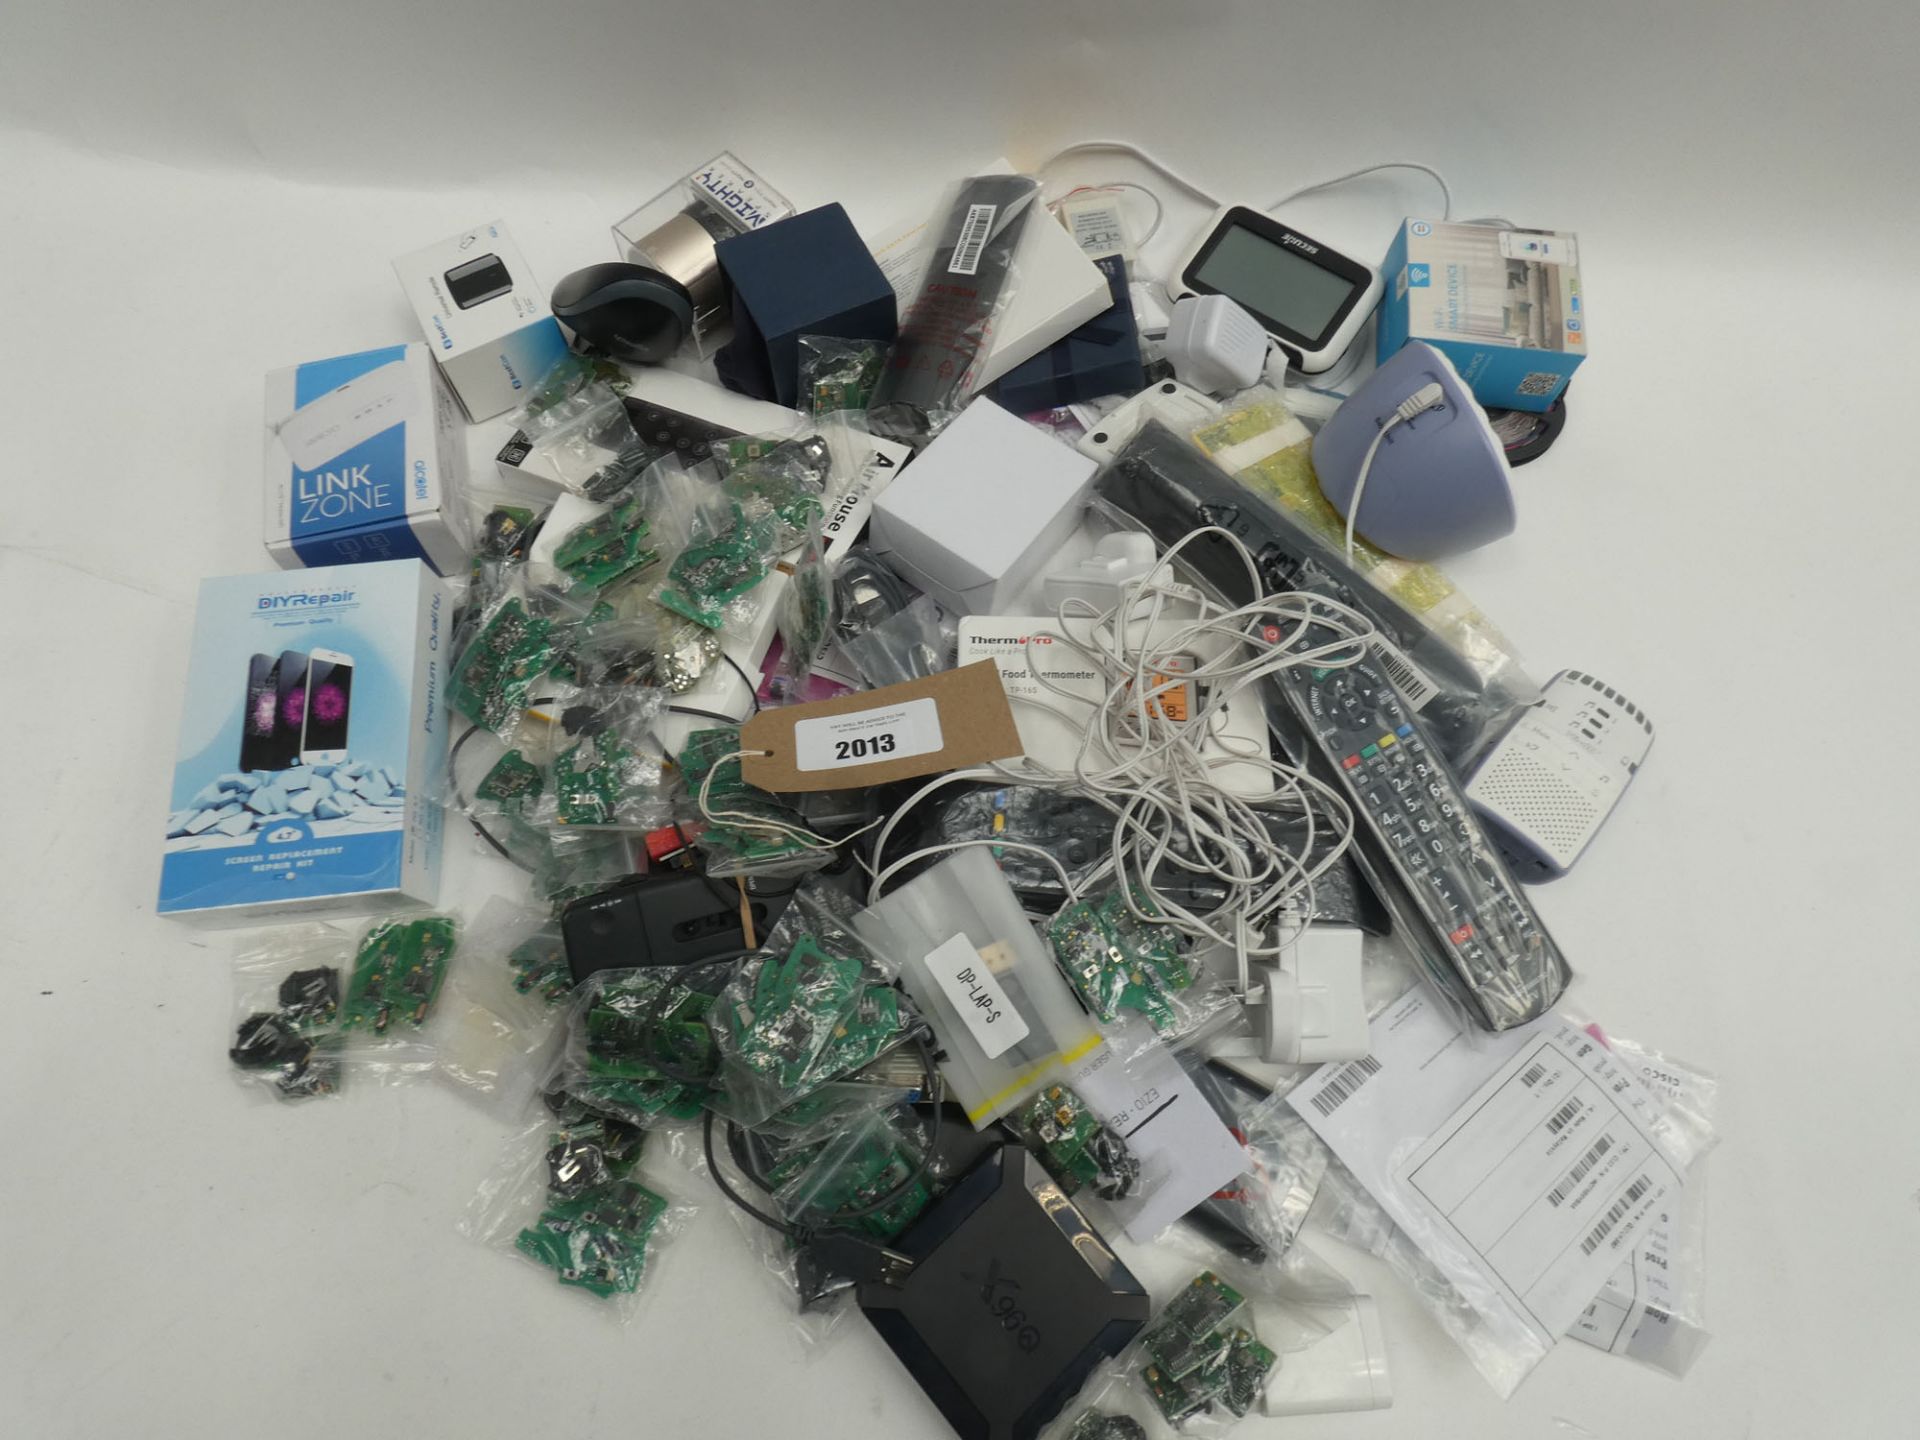 Bag containing quantity of electrical related accessories and devices